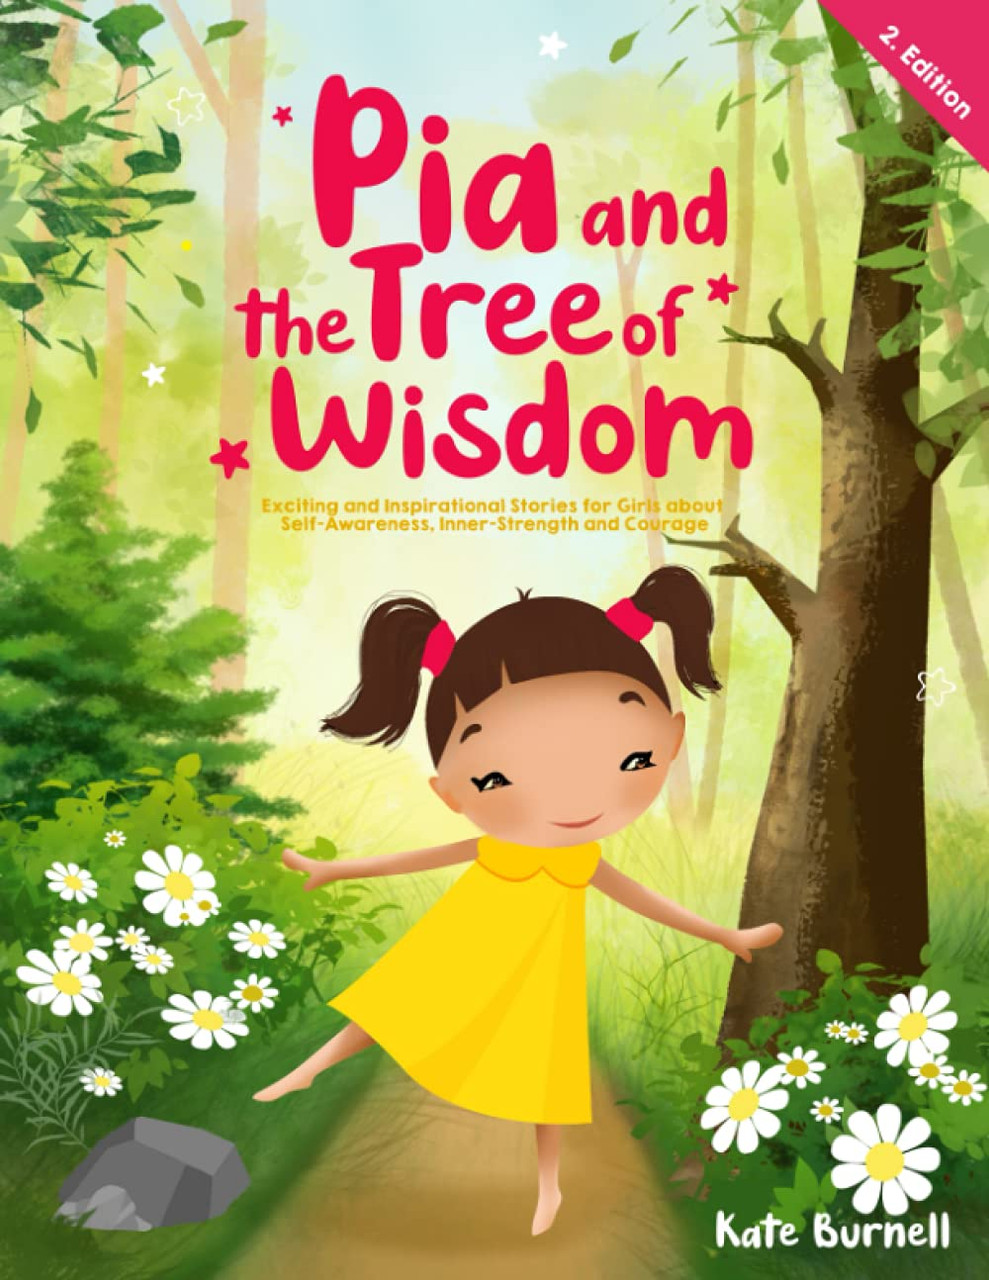 Kate Burnell / Pia and the Tree of Wisdom: Exciting and Inspirational Stories for Girls about Self-Awareness, Inner-Strength and Courage (Children's Picture Book)